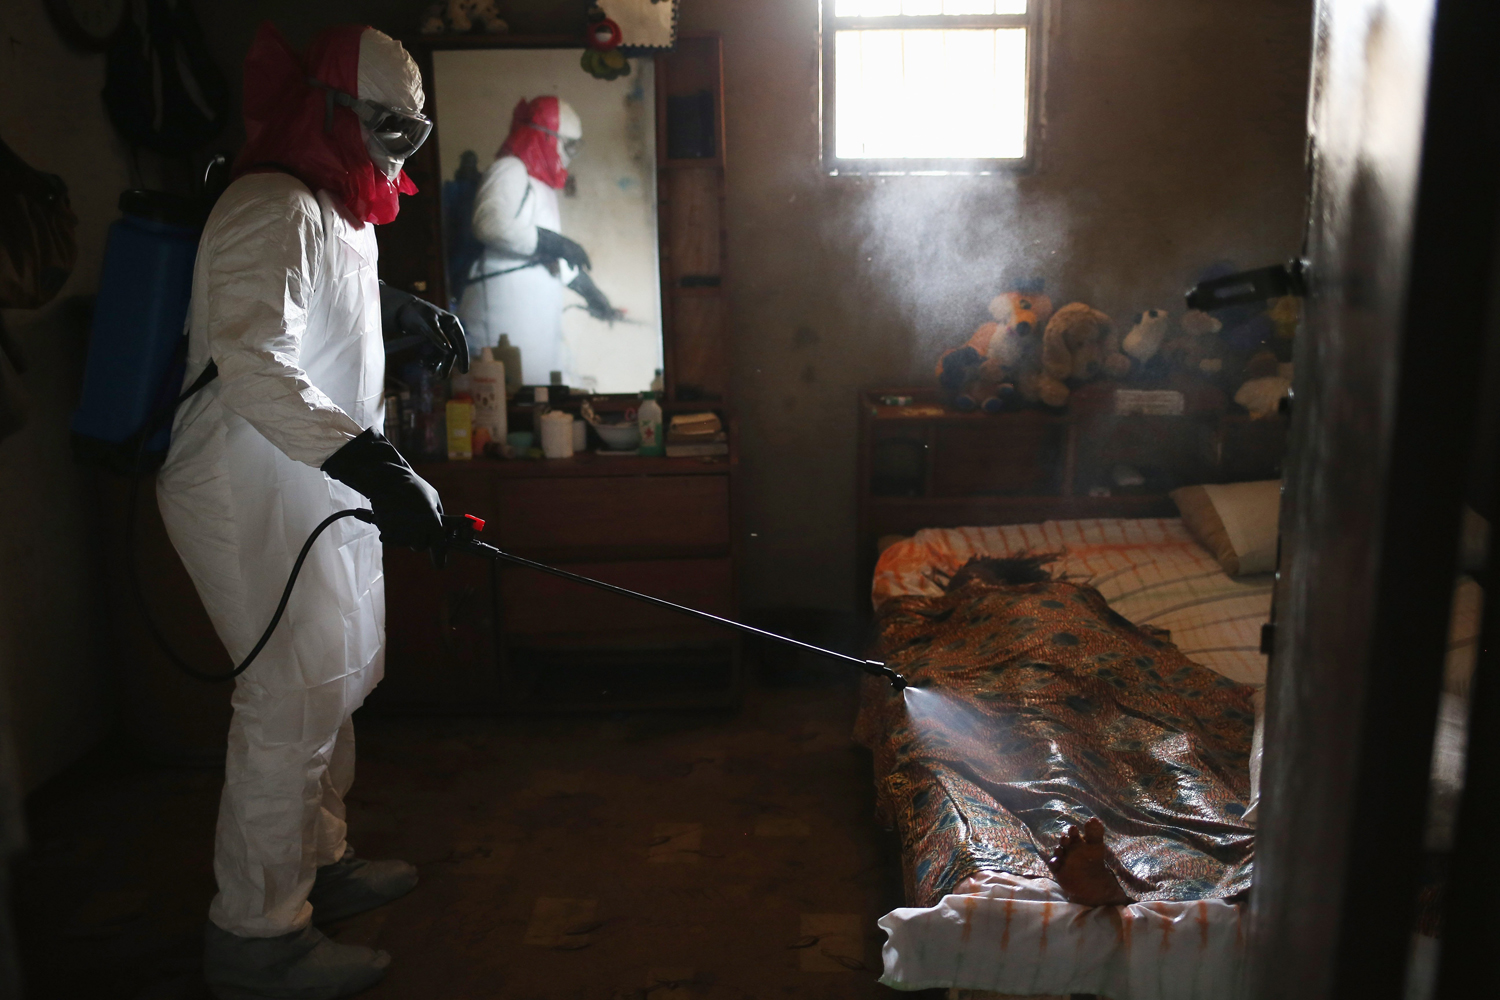 August 14, 2014. A burial team from the Liberian health department sprays disinfectant over the body of a woman suspected of dying of the Ebola virus in Monrovia, Liberia.